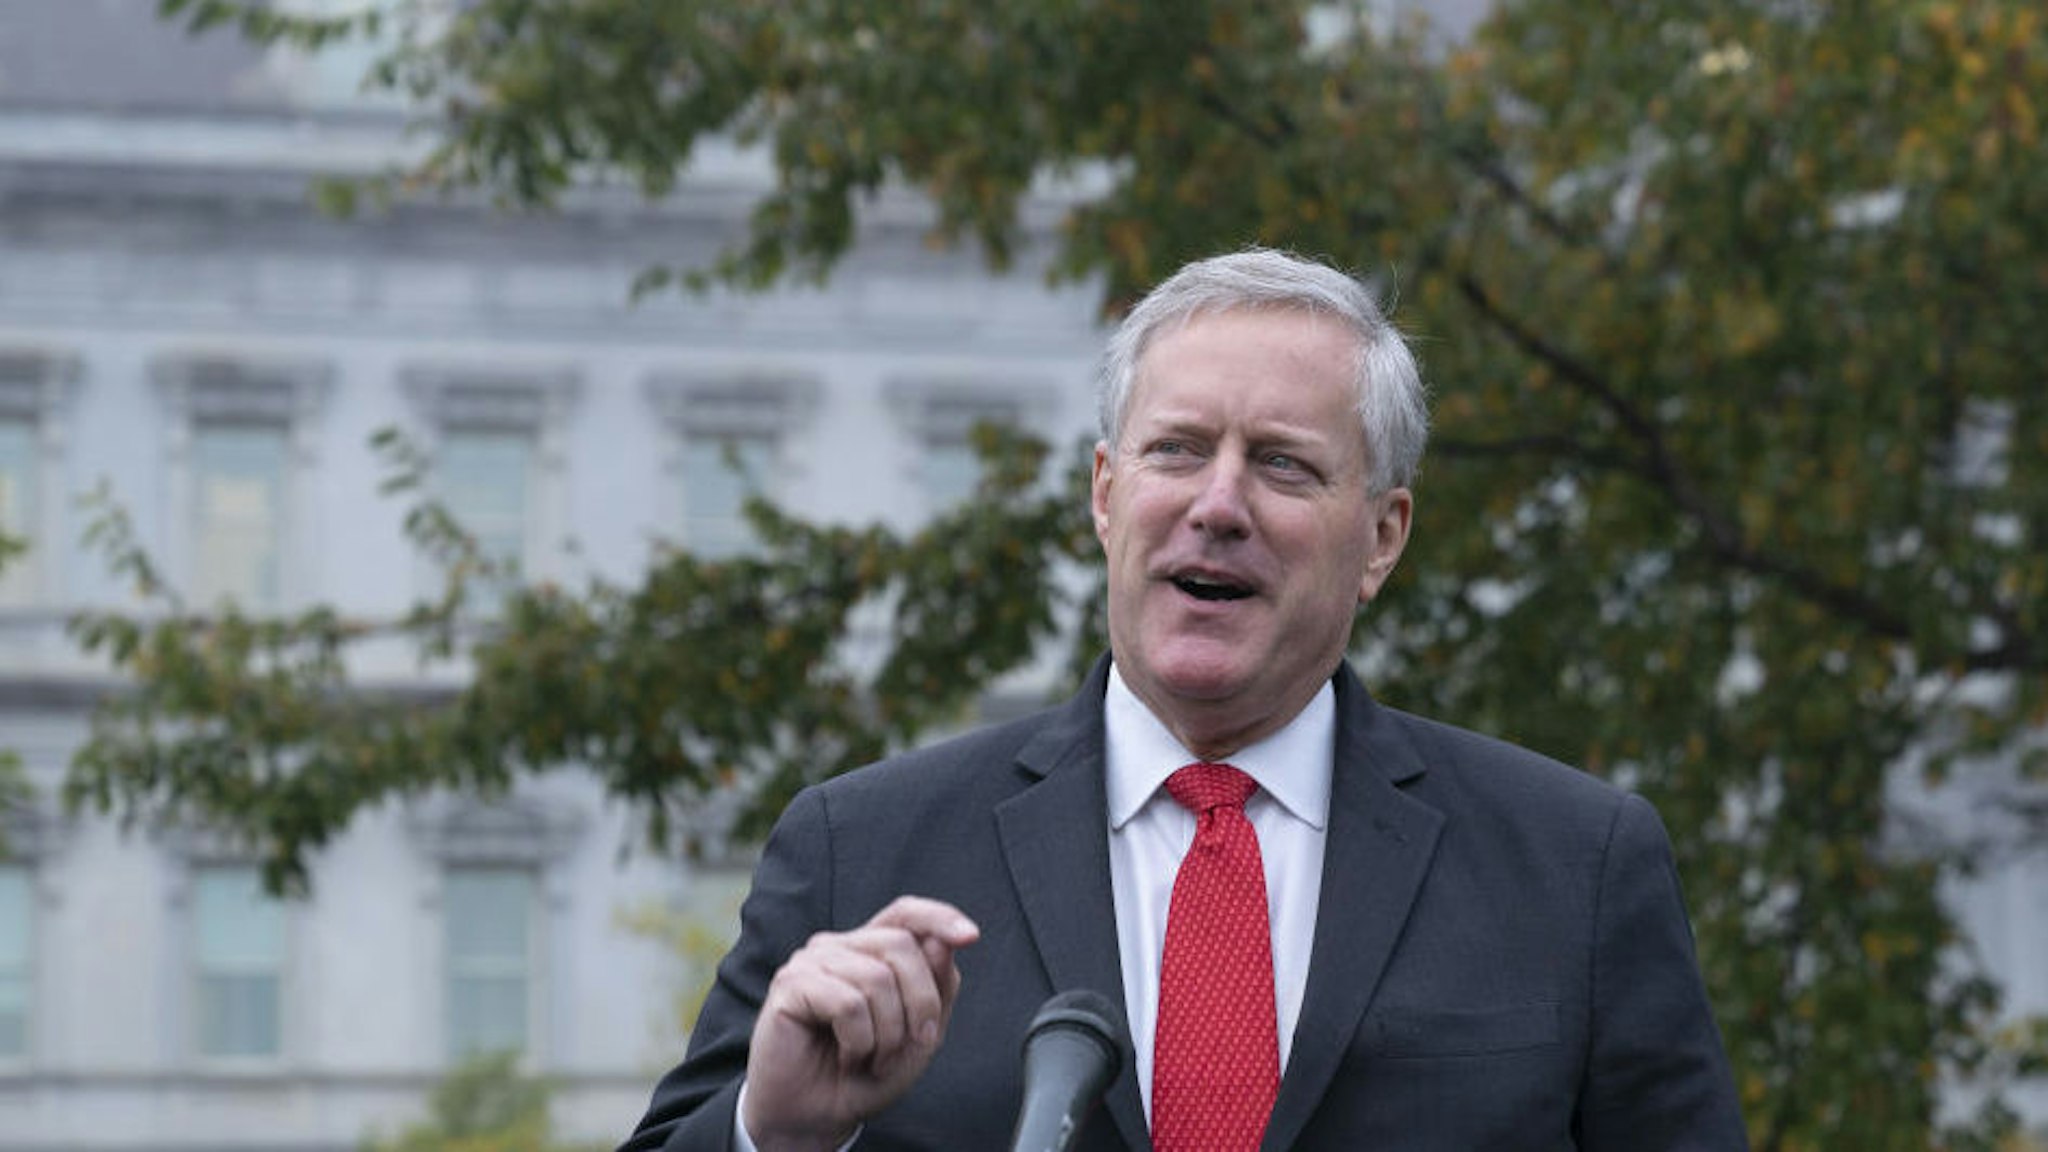 Mark Meadows, White House chief of staff, speaks to members of the media outside of the White House in Washington, D.C., U.S., on Wednesday, Oct. 21, 2020. Meadows said the goal in talks with House Speaker Pelosi is a deal on a coronavirus relief package within the next 48 hours.